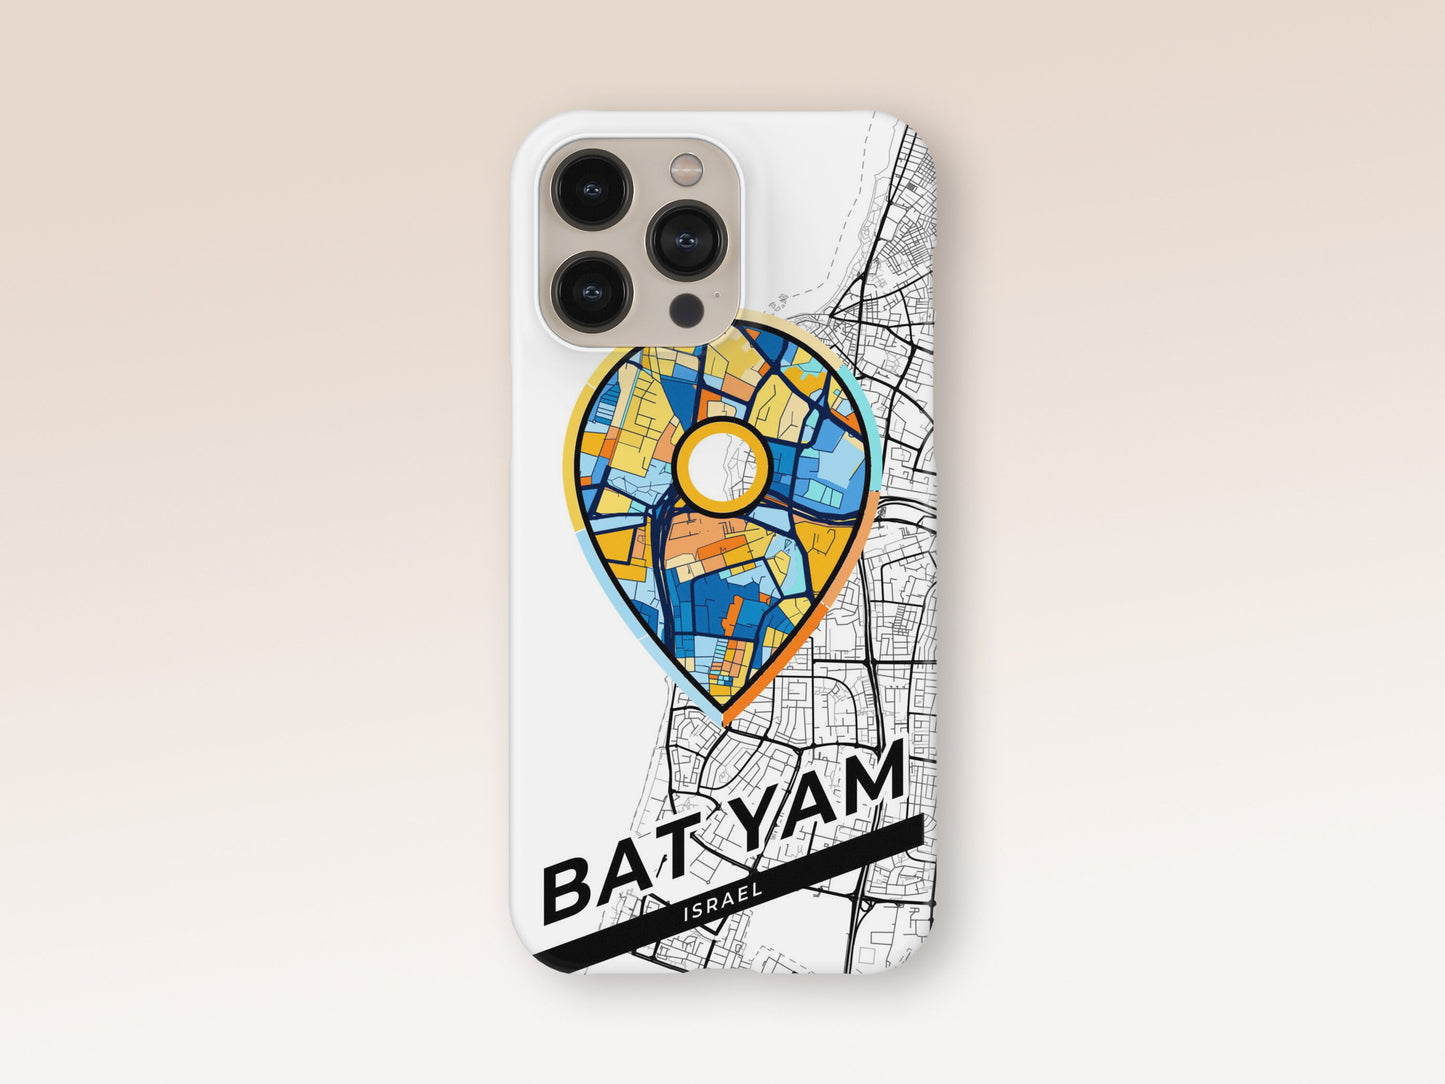 Bat Yam Israel slim phone case with colorful icon. Birthday, wedding or housewarming gift. Couple match cases. 1